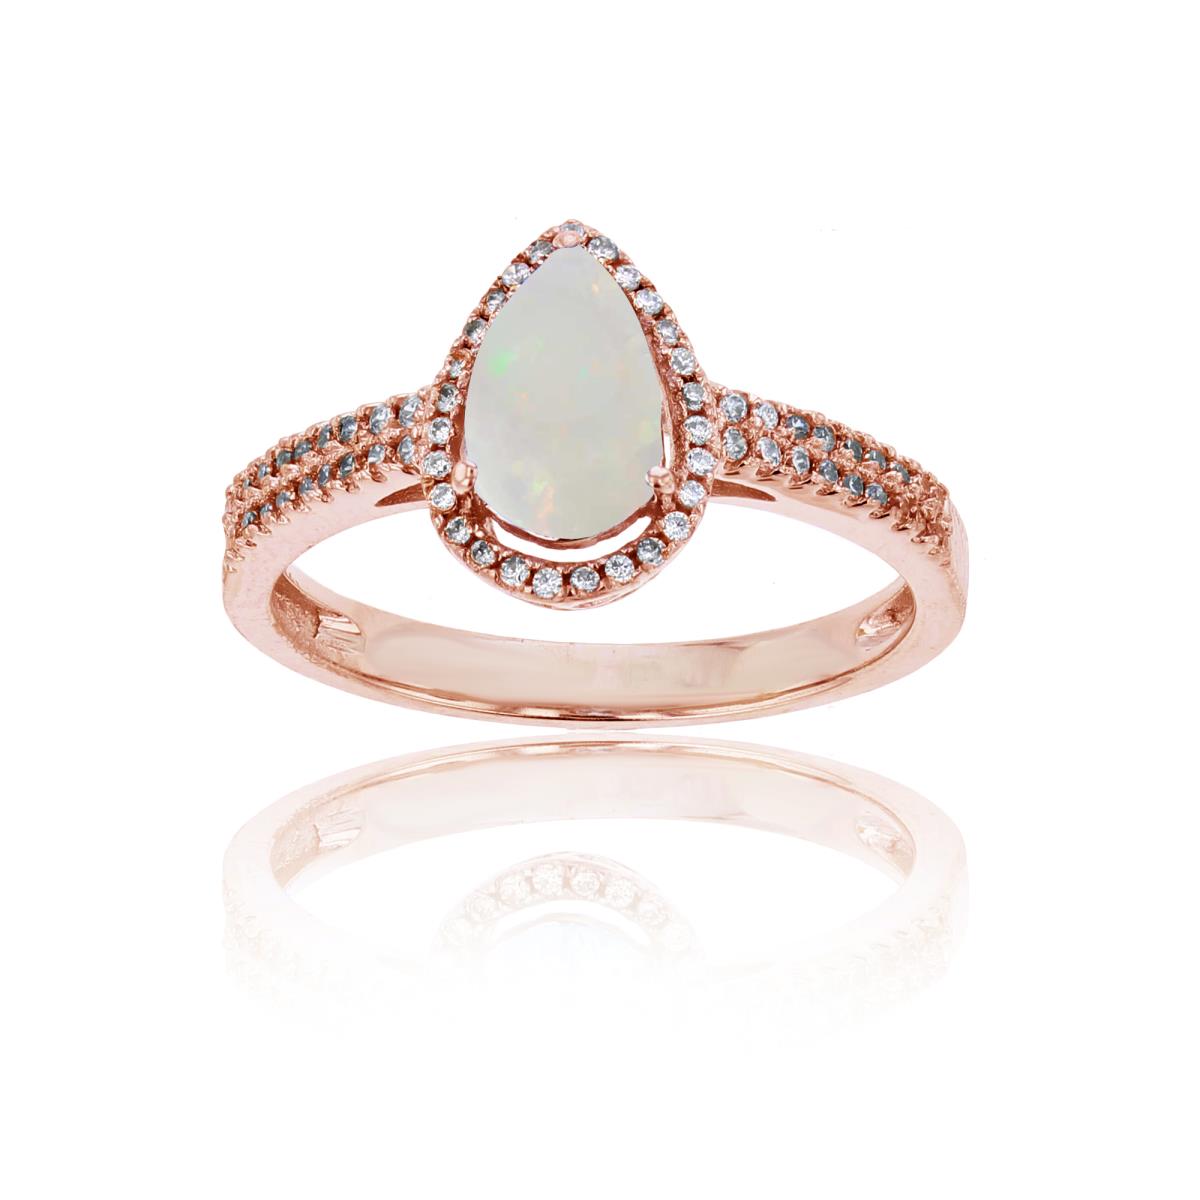 10K Rose Gold 0.20 CTTW Round Diamond & 8x5mm Pear Cut Opal Halo Ring